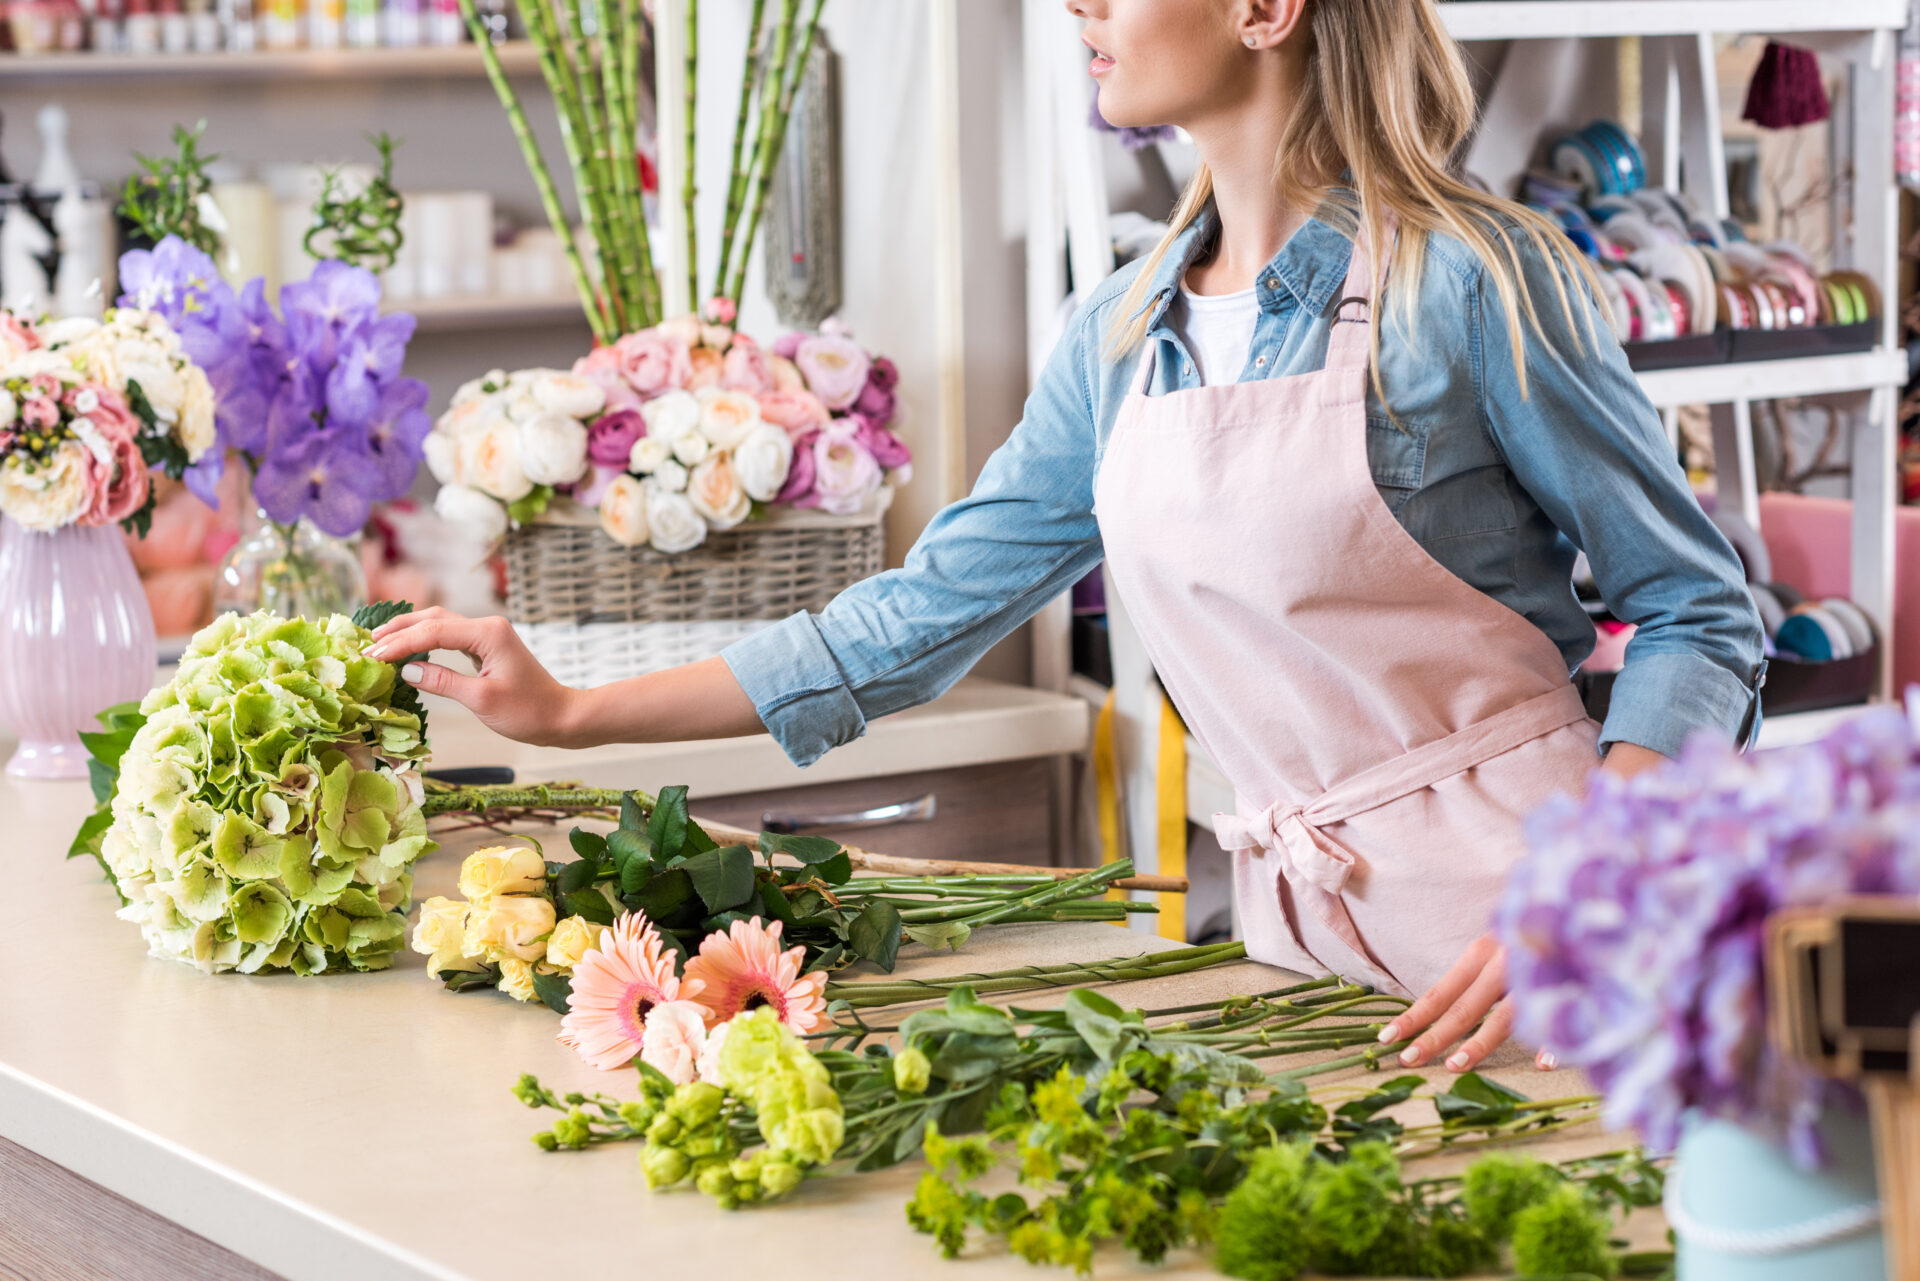 Sparkle and Beauty in the Buds: Blossom Express - Your Flower Shop with Overnight Delivery!